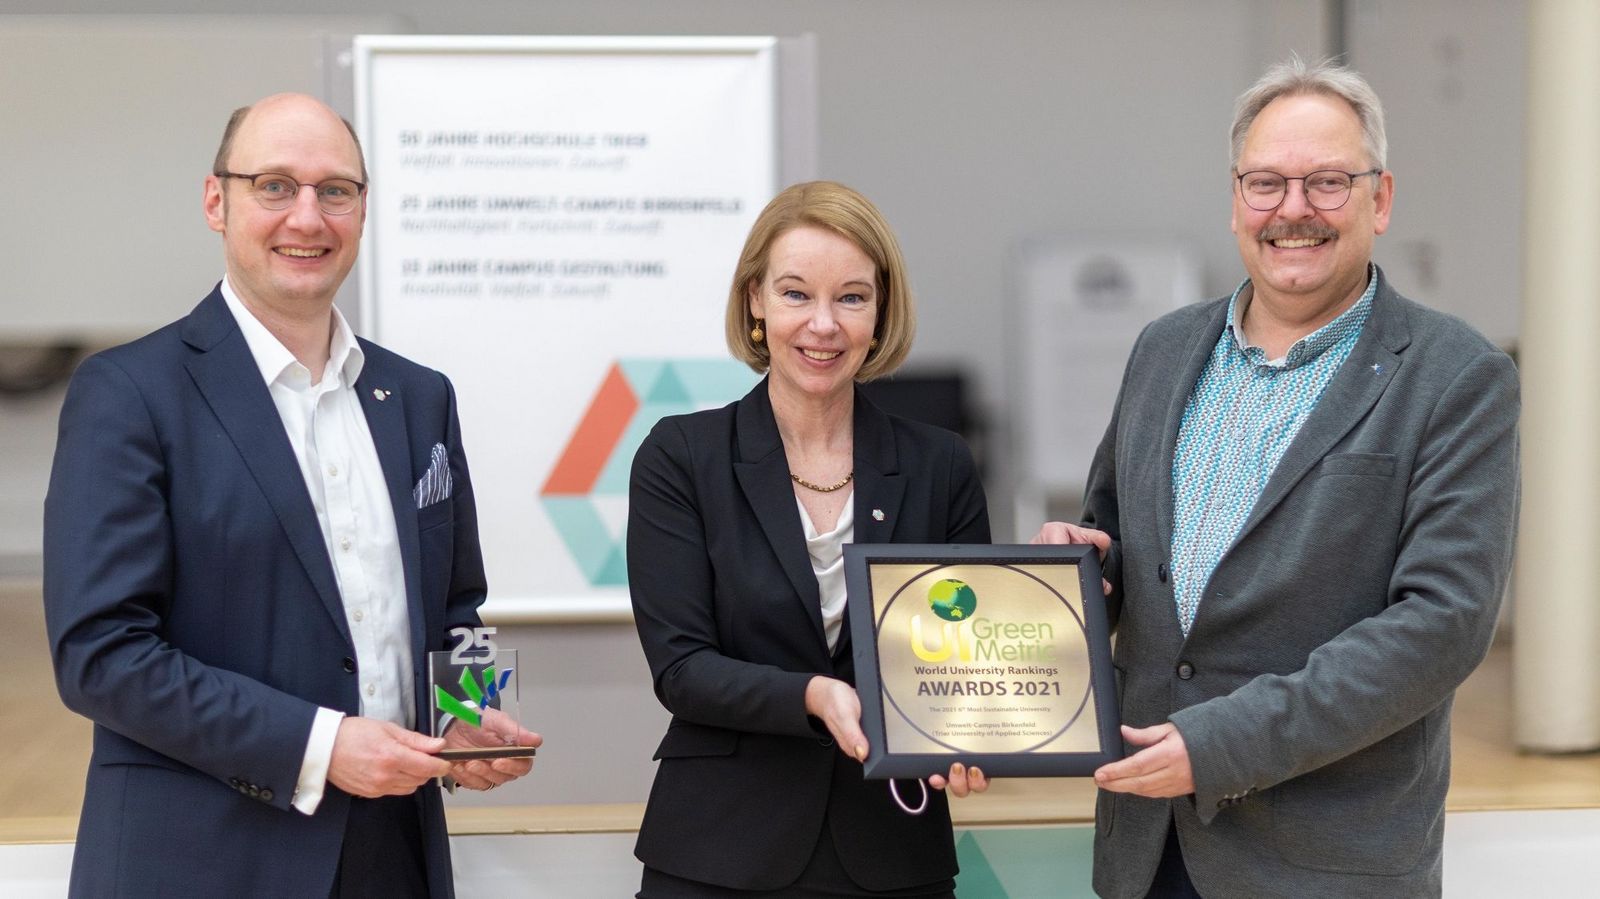 Prof. Dr. Henrik te Heesen, President Prof. Dr. Dorit Schumann and Sustainability Officer Prof. Dr. Klaus Helling with the award. (@Tobias Serf)